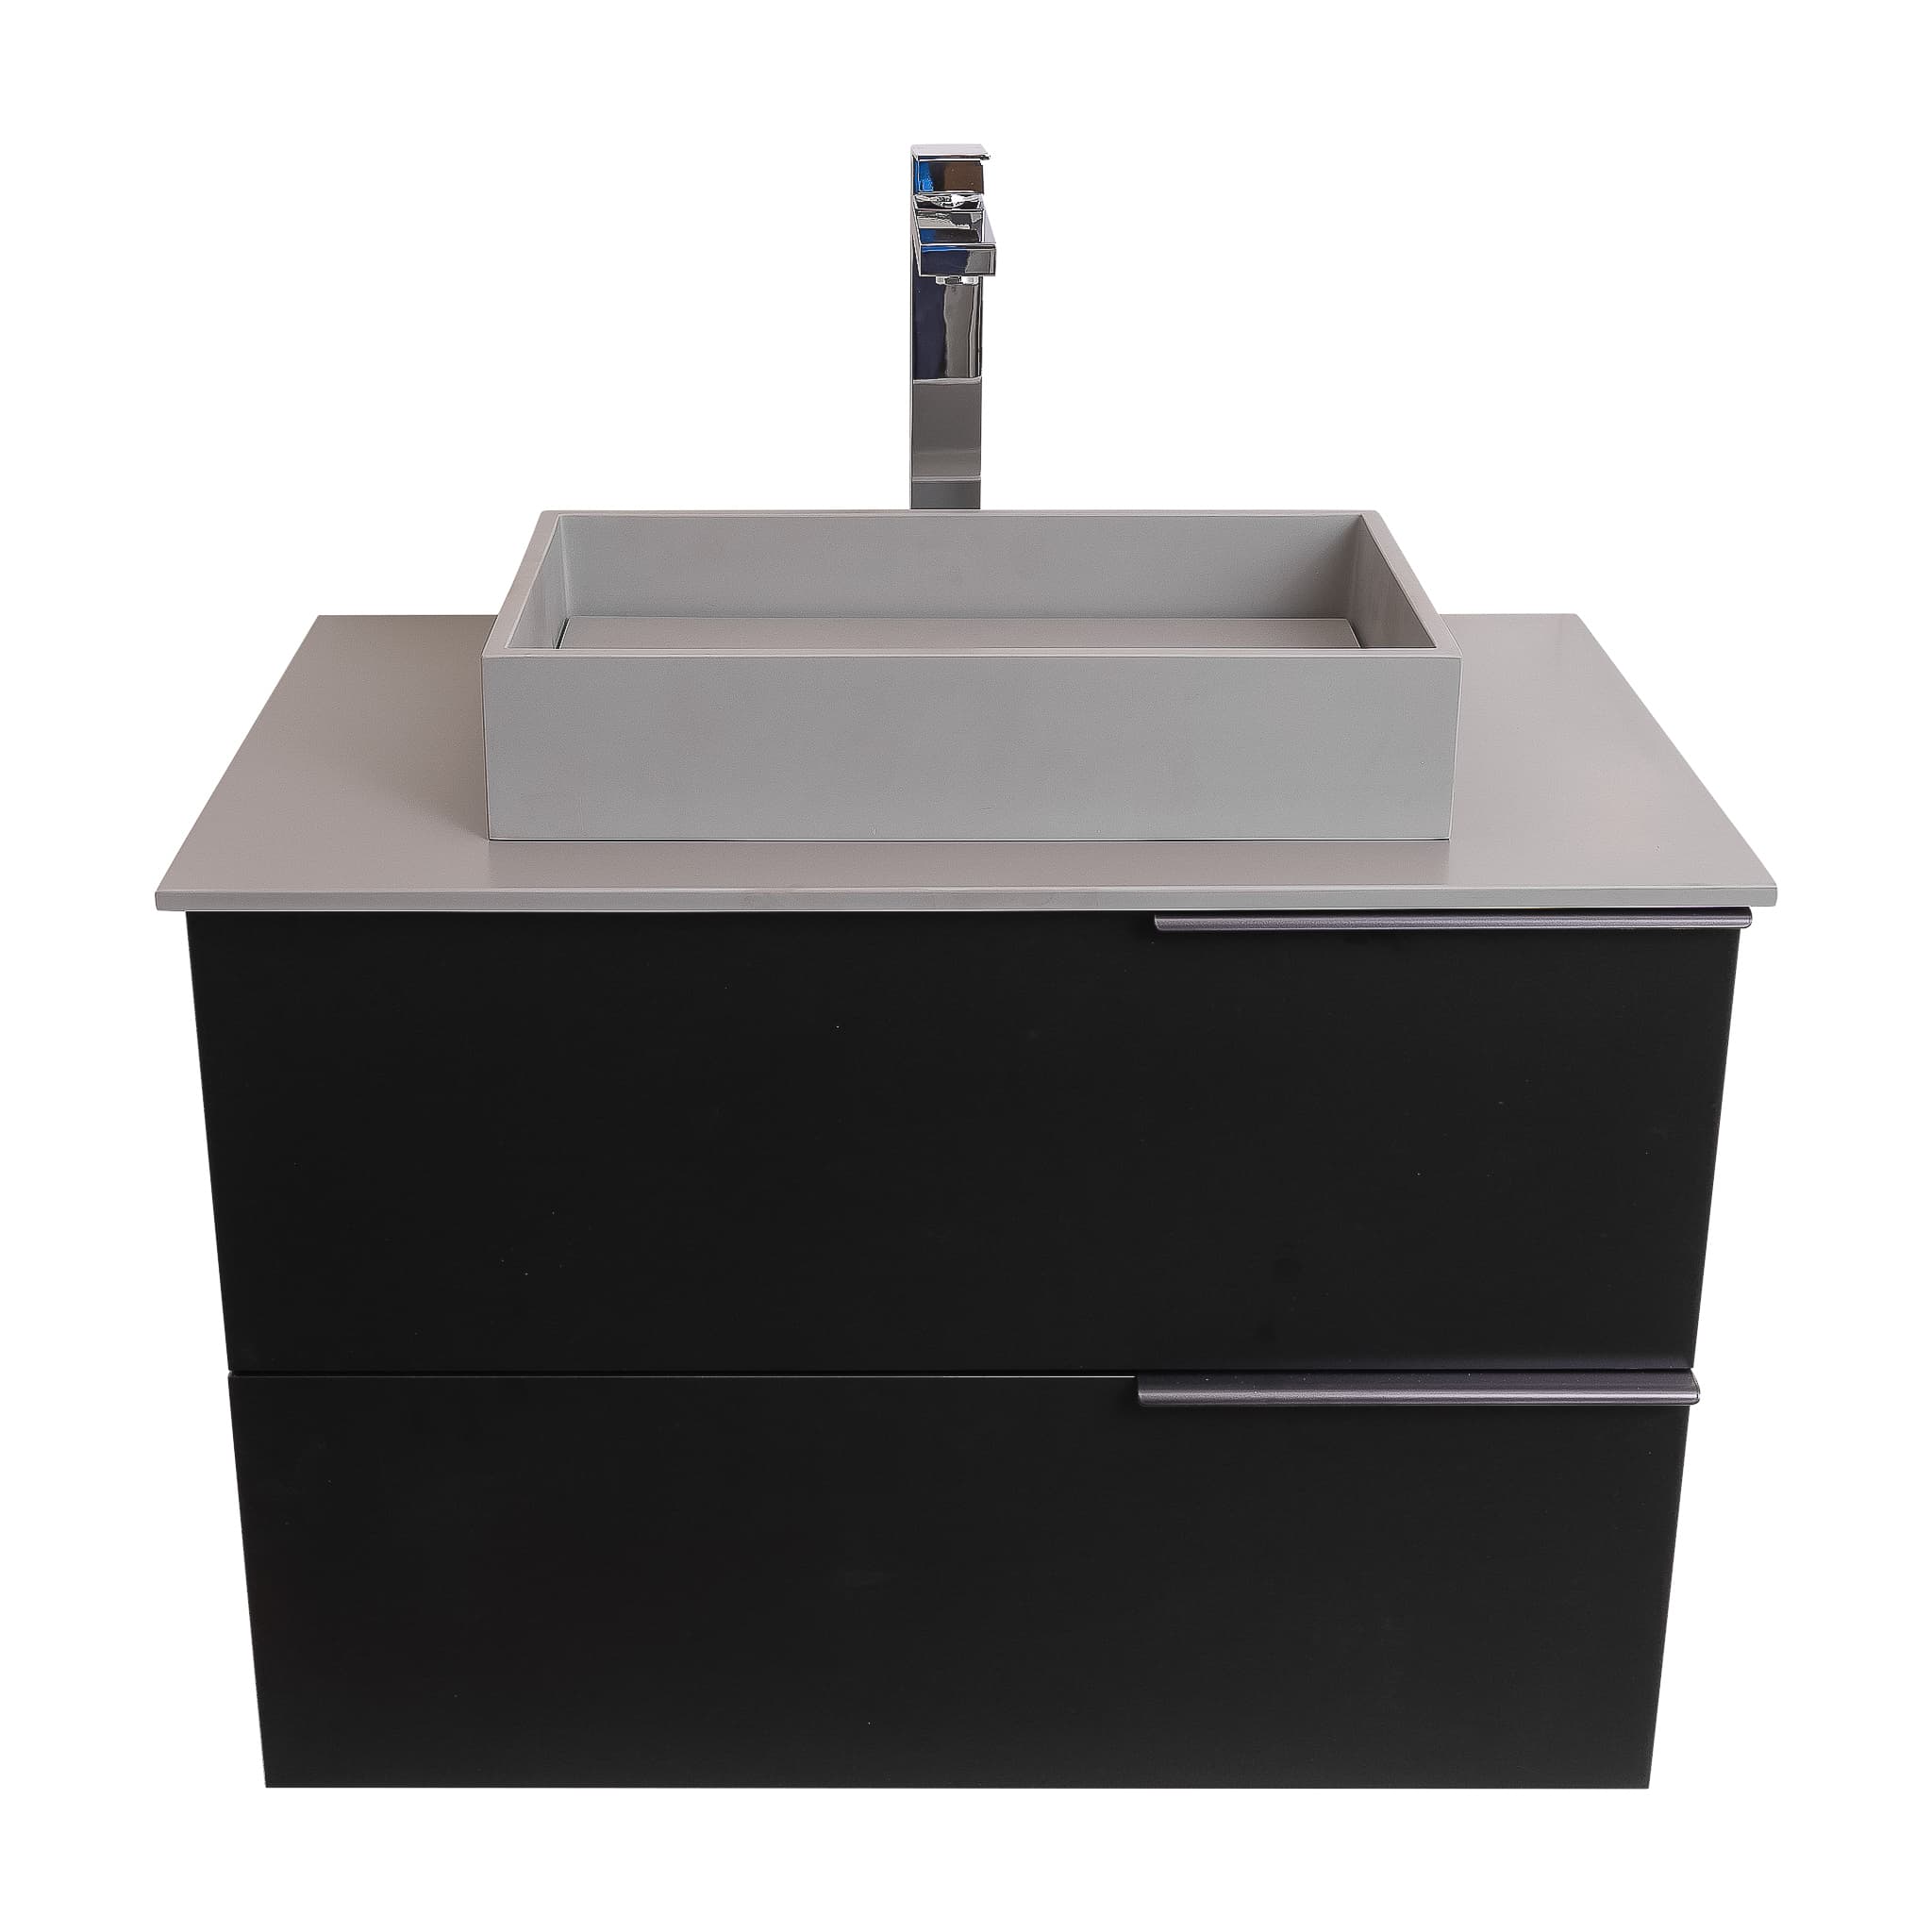 Mallorca 31.5 Matte Black Cabinet, Solid Surface Flat Grey Counter And Infinity Square Solid Surface Grey Basin 1329, Wall Mounted Modern Vanity Set